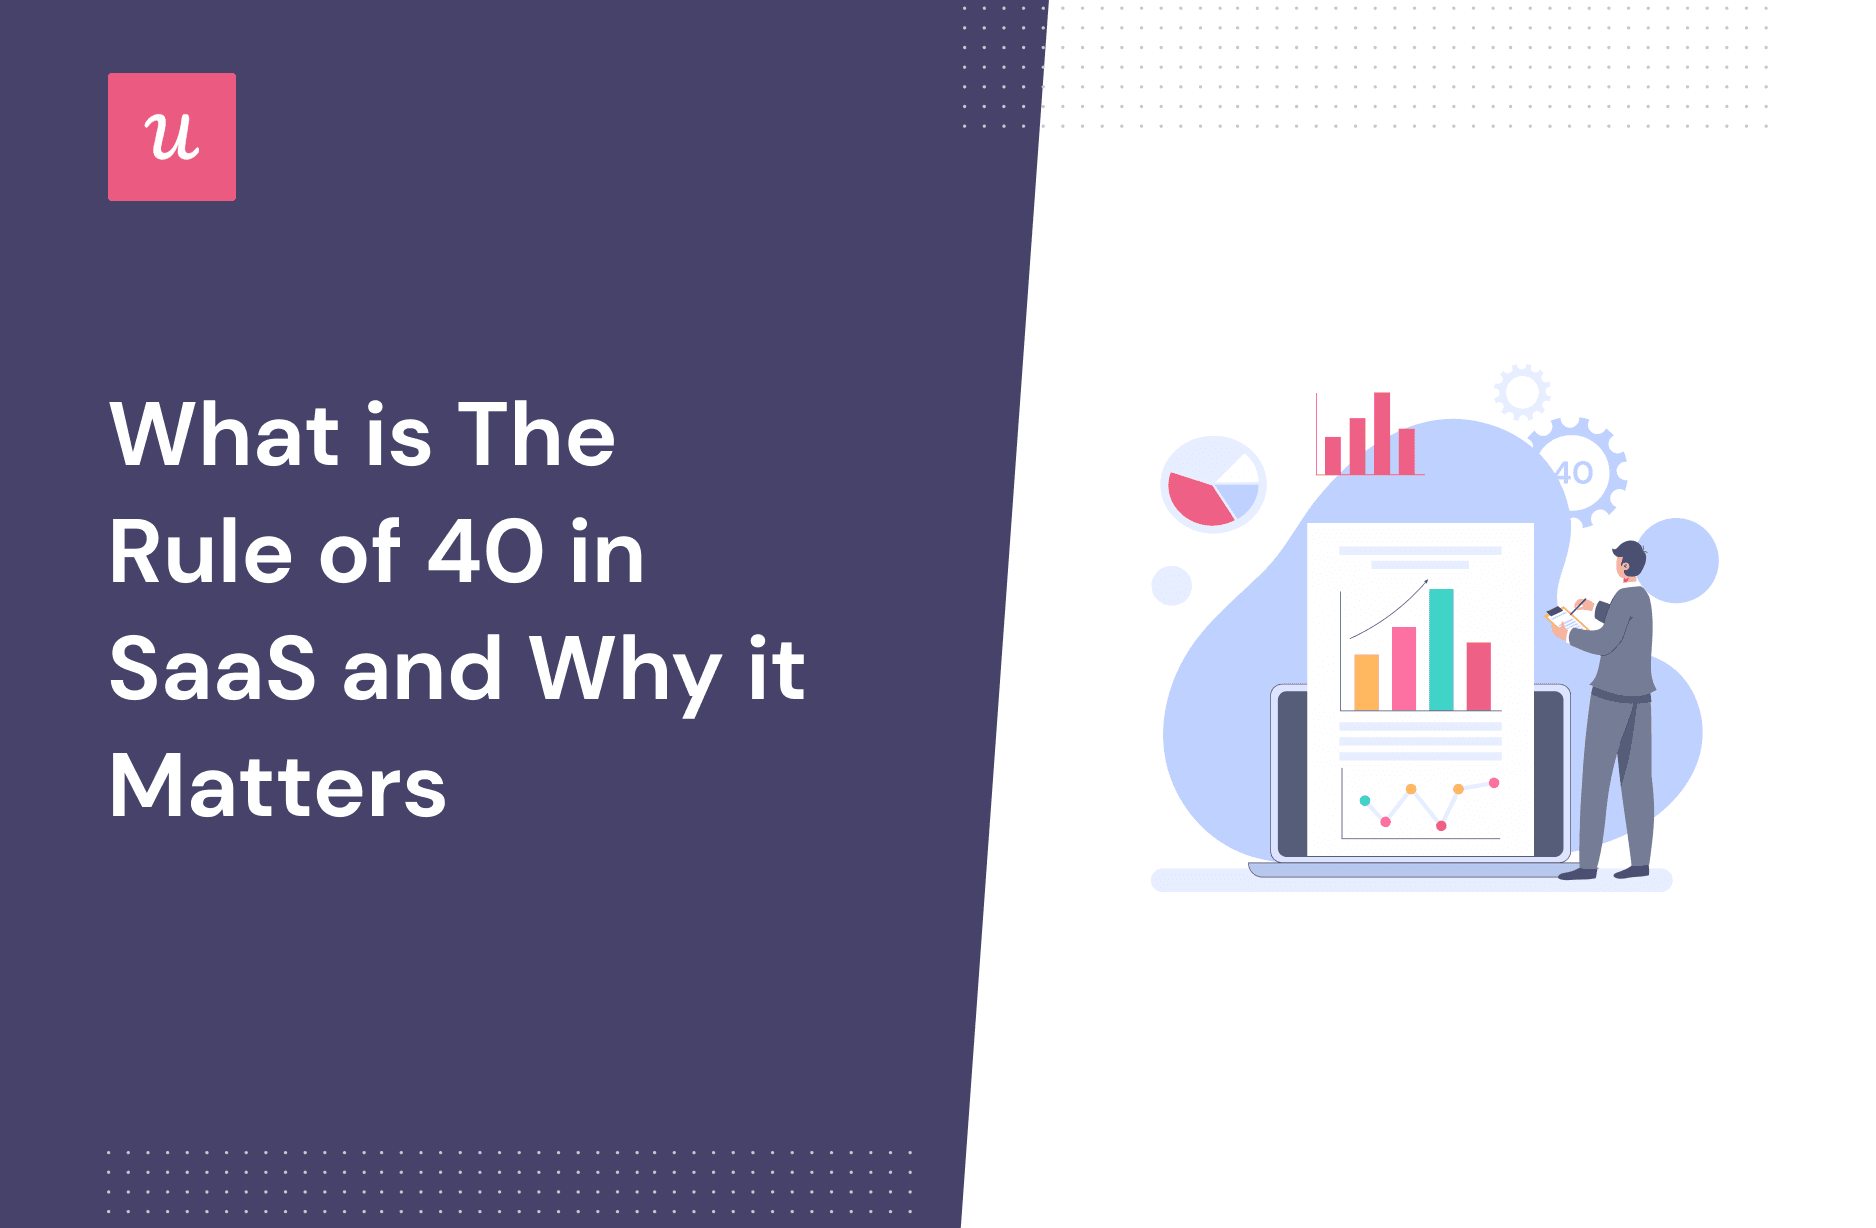 What Is The Rule of 40 In SaaS And Why Does It Matter?